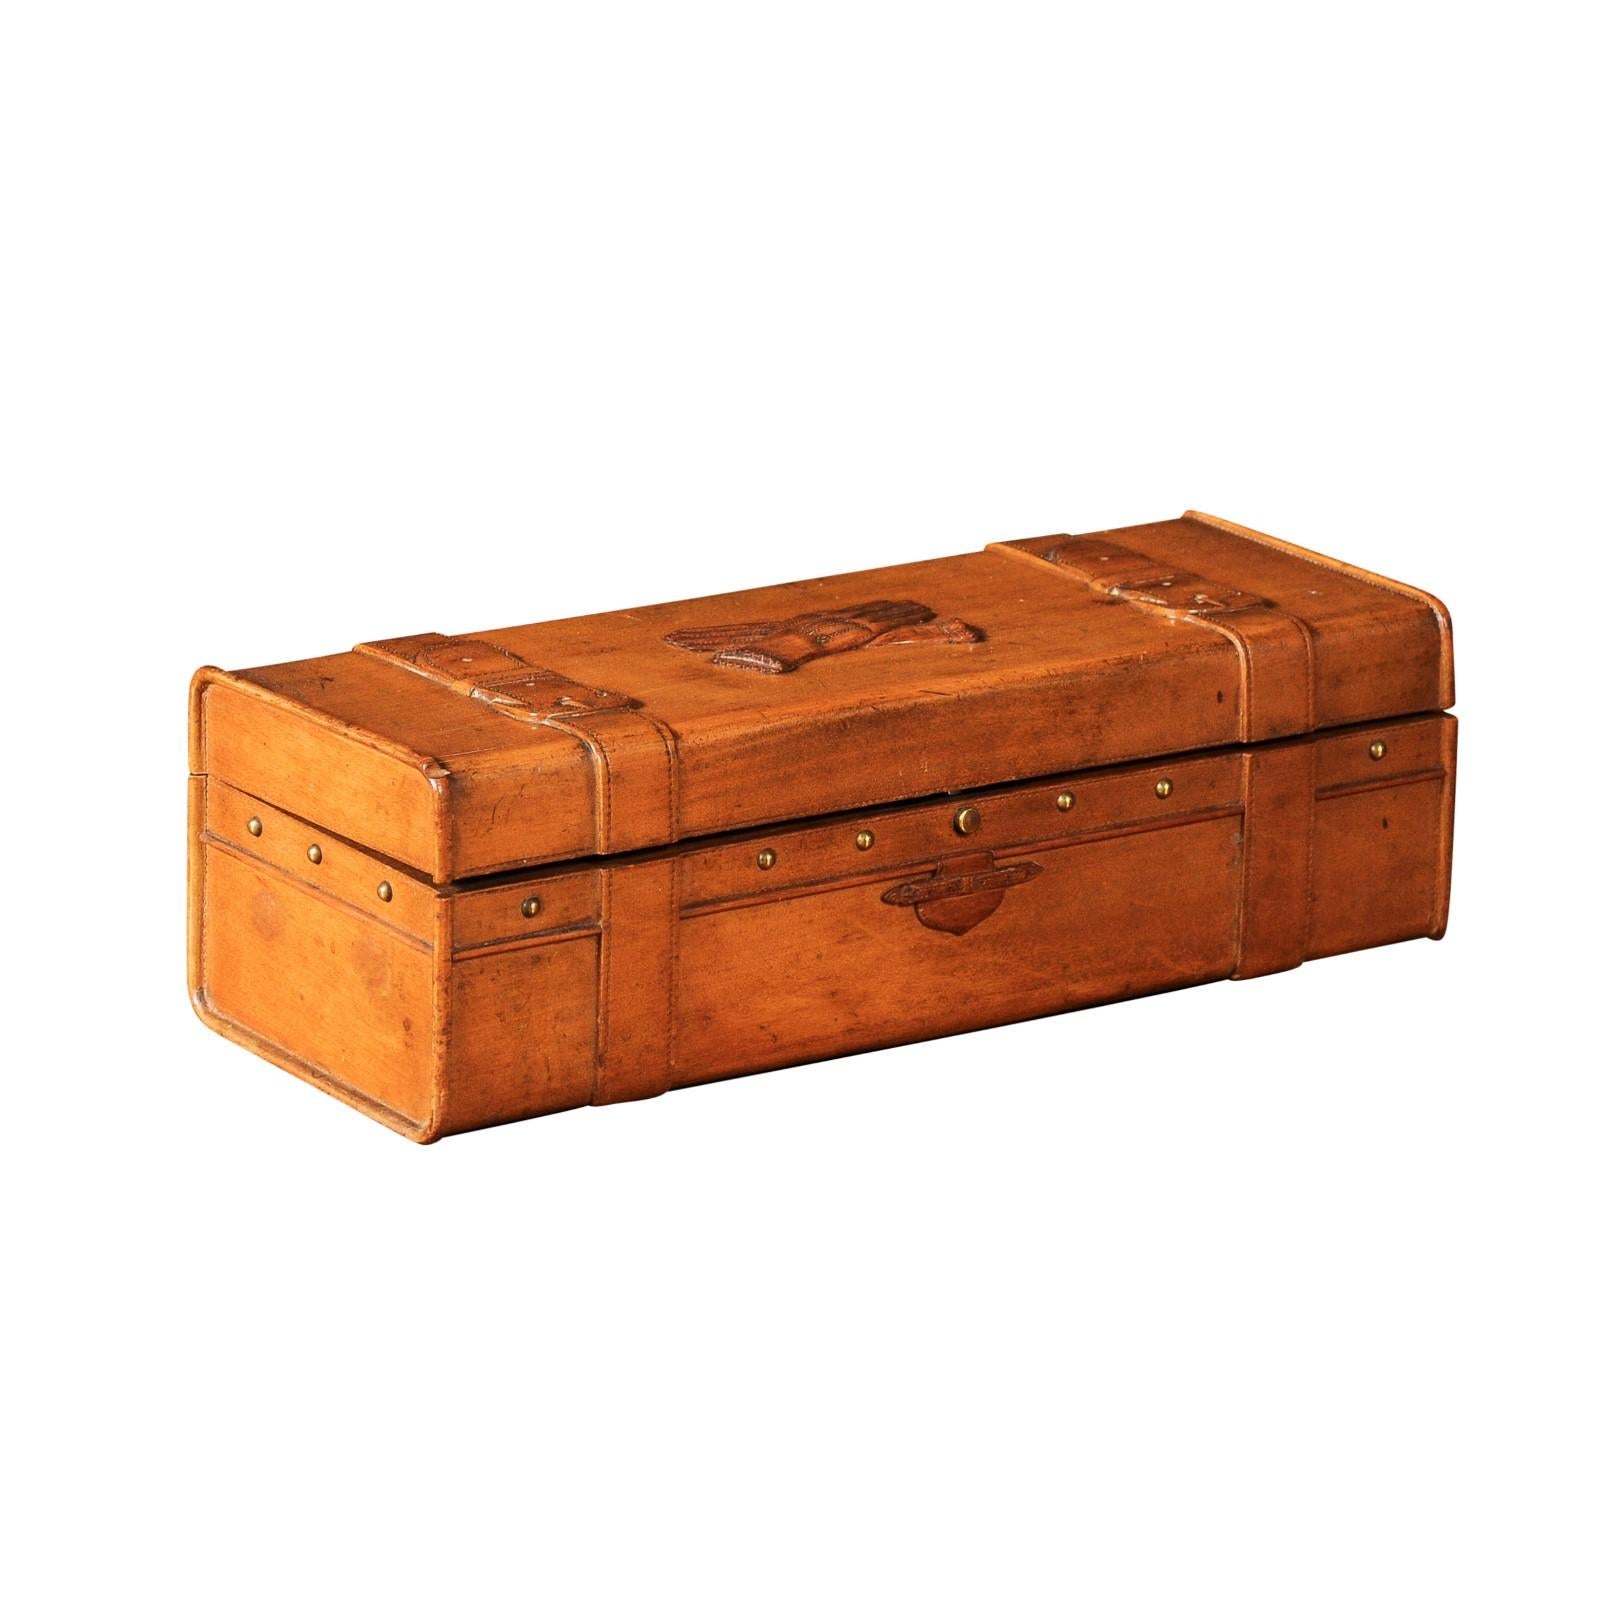 A French cherry glove box from the 19th century with two gloves carved in low relief on the lid as well as carved straps. Immerse yourself in the elegance of yesteryears with this 19th century French cherry glove box. Carved from rich, warm cherry